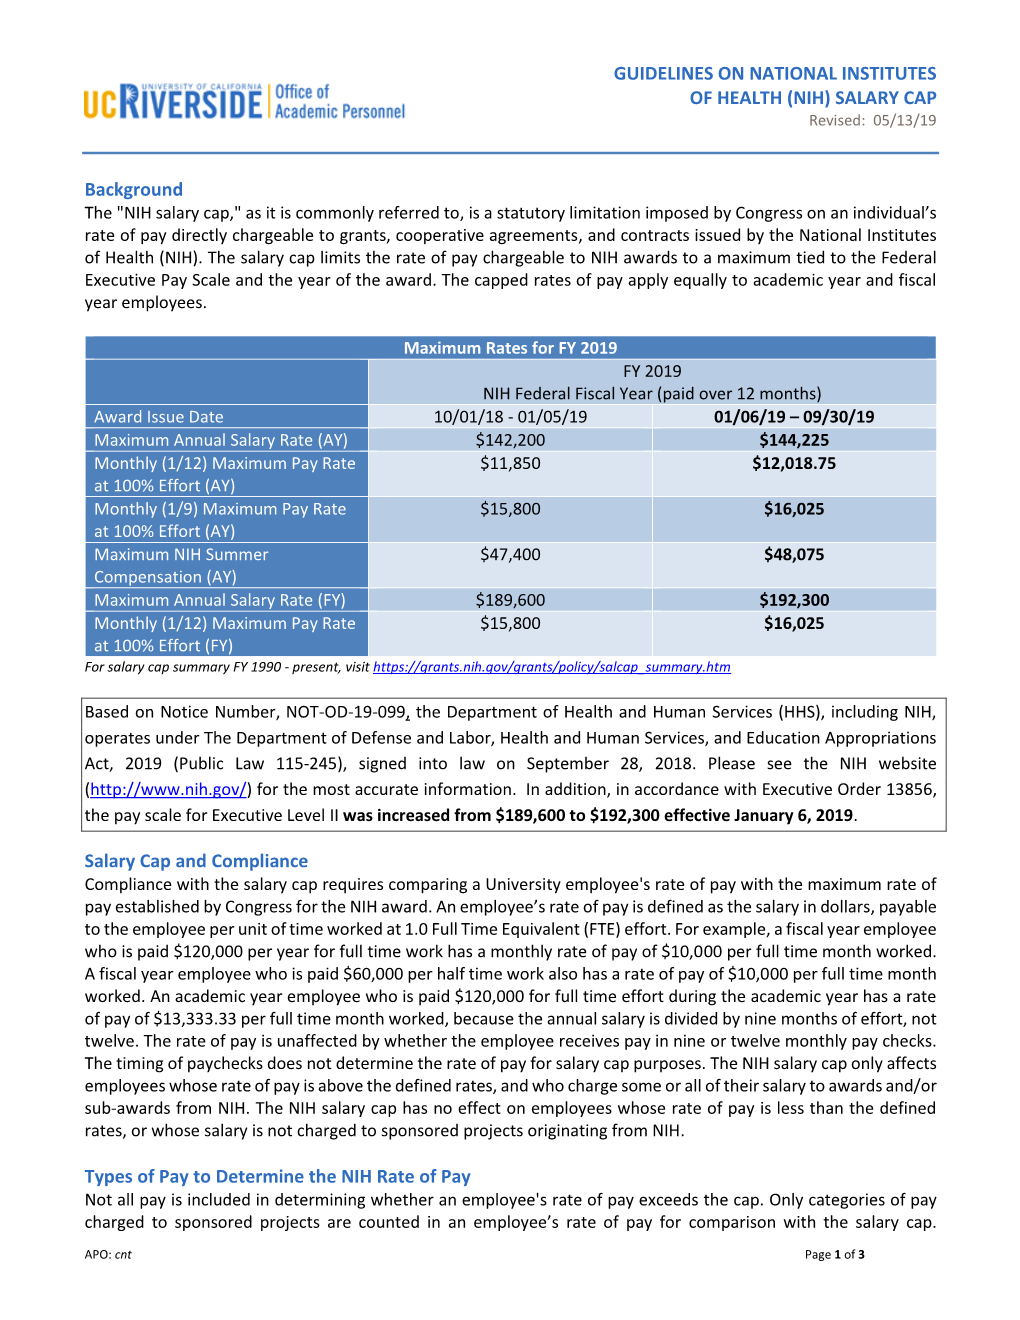 GUIDELINES on NATIONAL INSTITUTES of HEALTH (NIH) SALARY CAP Revised: 05/13/19